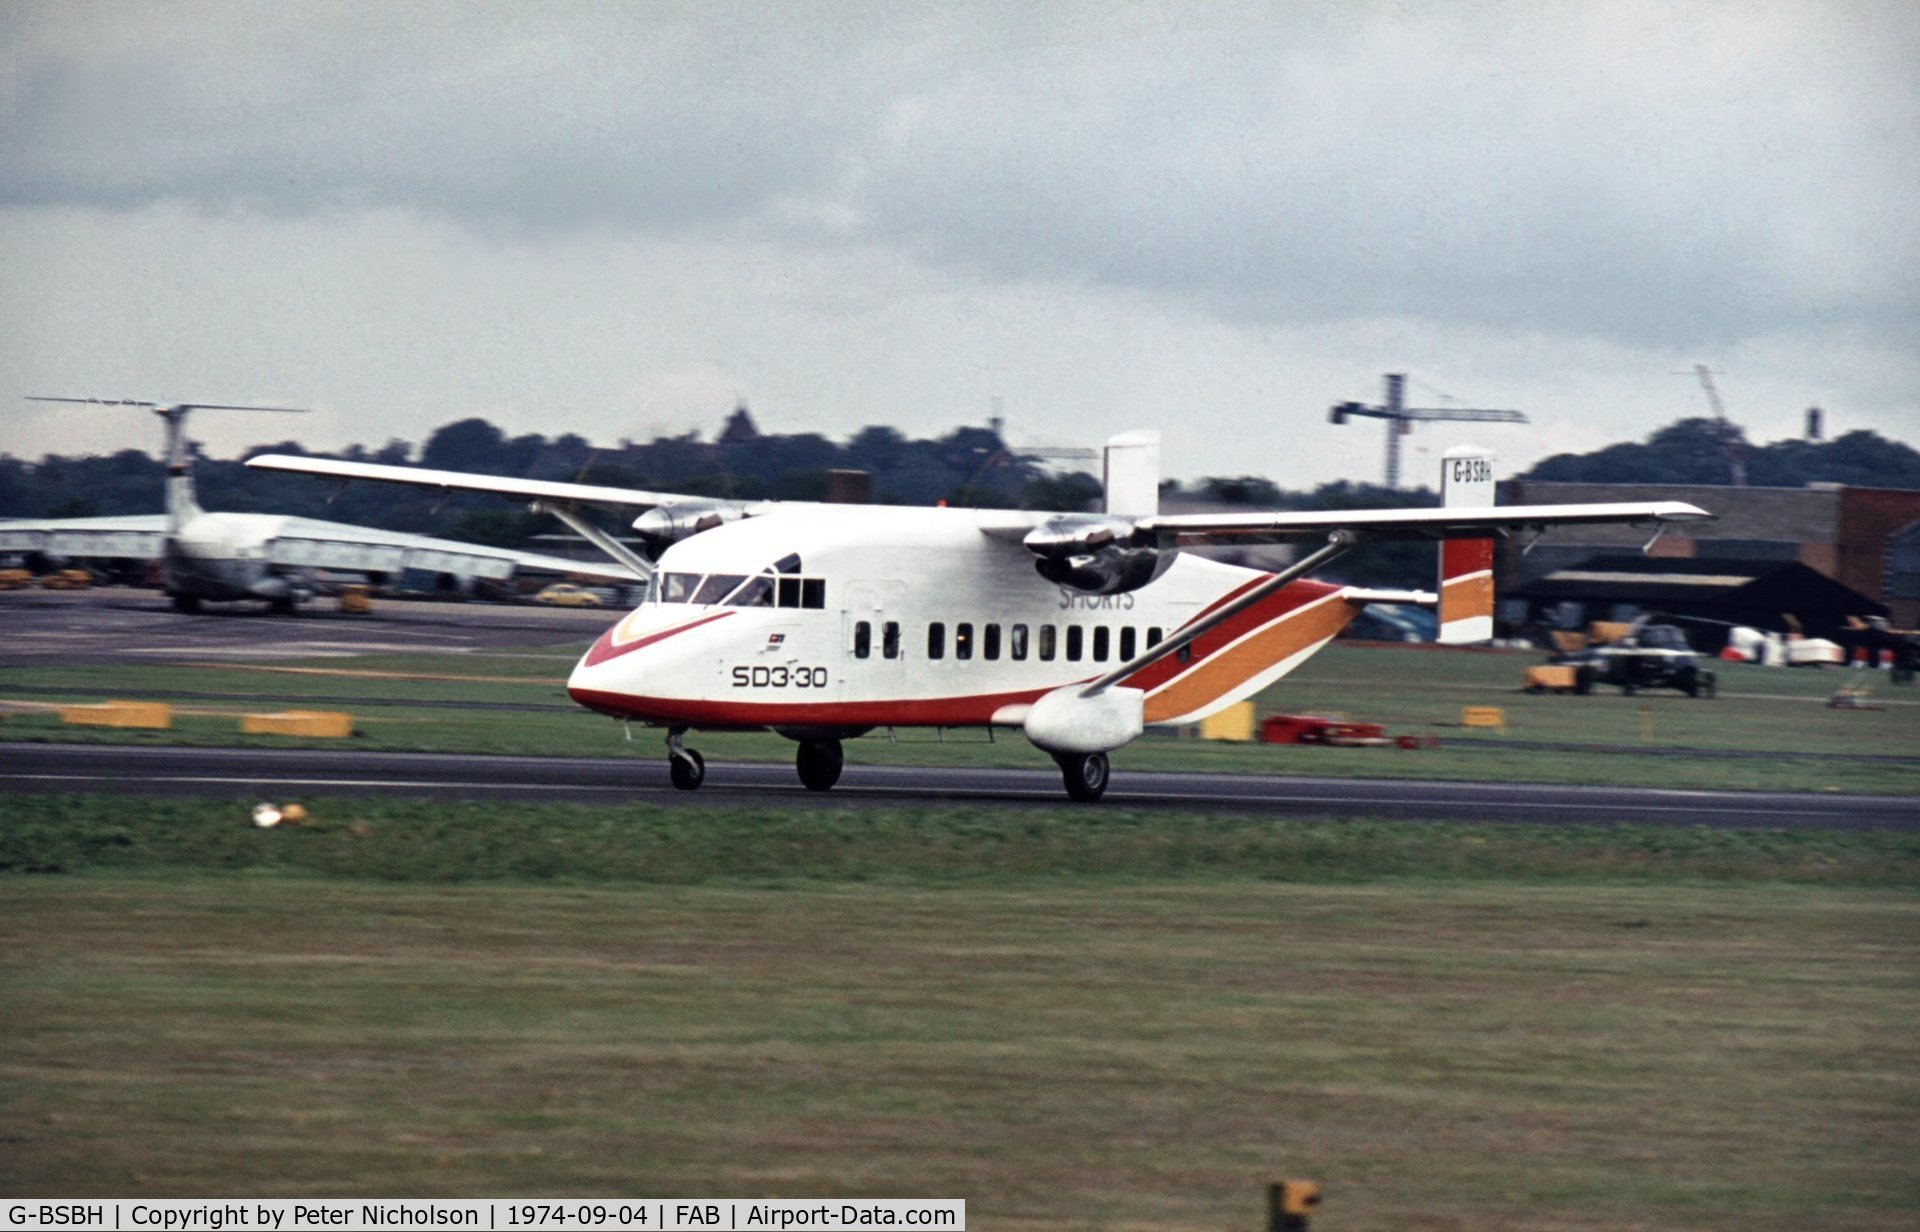 G-BSBH, 1974 Short 330 C/N SH.3000, Another view of the Shorts demonstrator at the 1974 Farnborough Airshow.